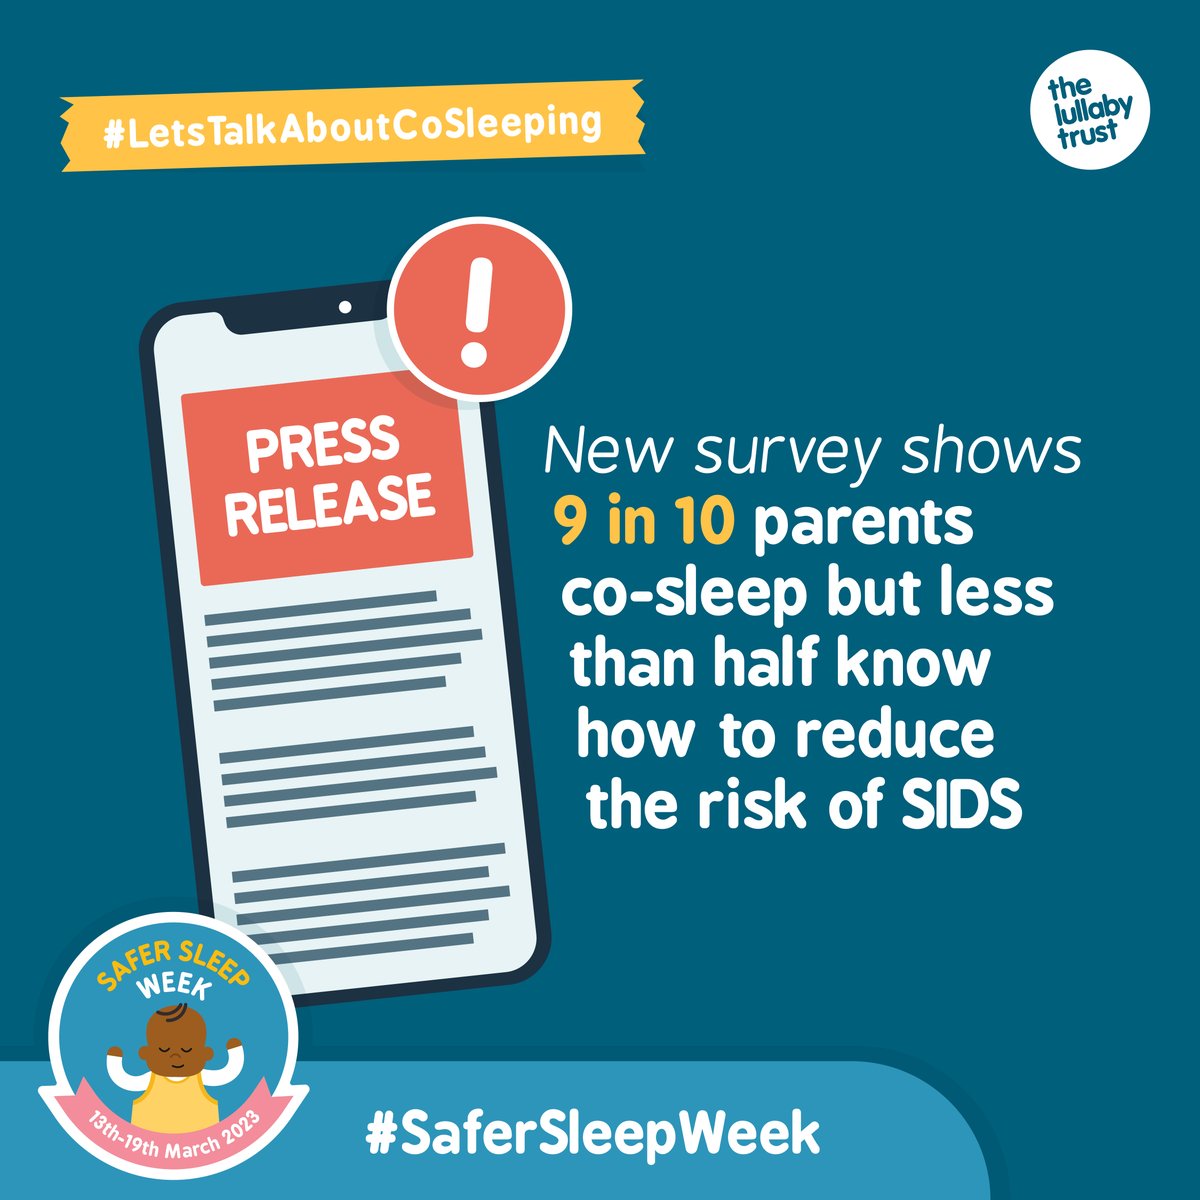 New survey shows 9 in 10 parents co-sleep but less than half know how to reduce the risk of SIDS. Give all parents and carers info on preparing a bed for co-sleeping more safely. #LetsTalkAboutCoSleeping #SaferSleepWeek Read our press release at bit.ly/3Jy1237